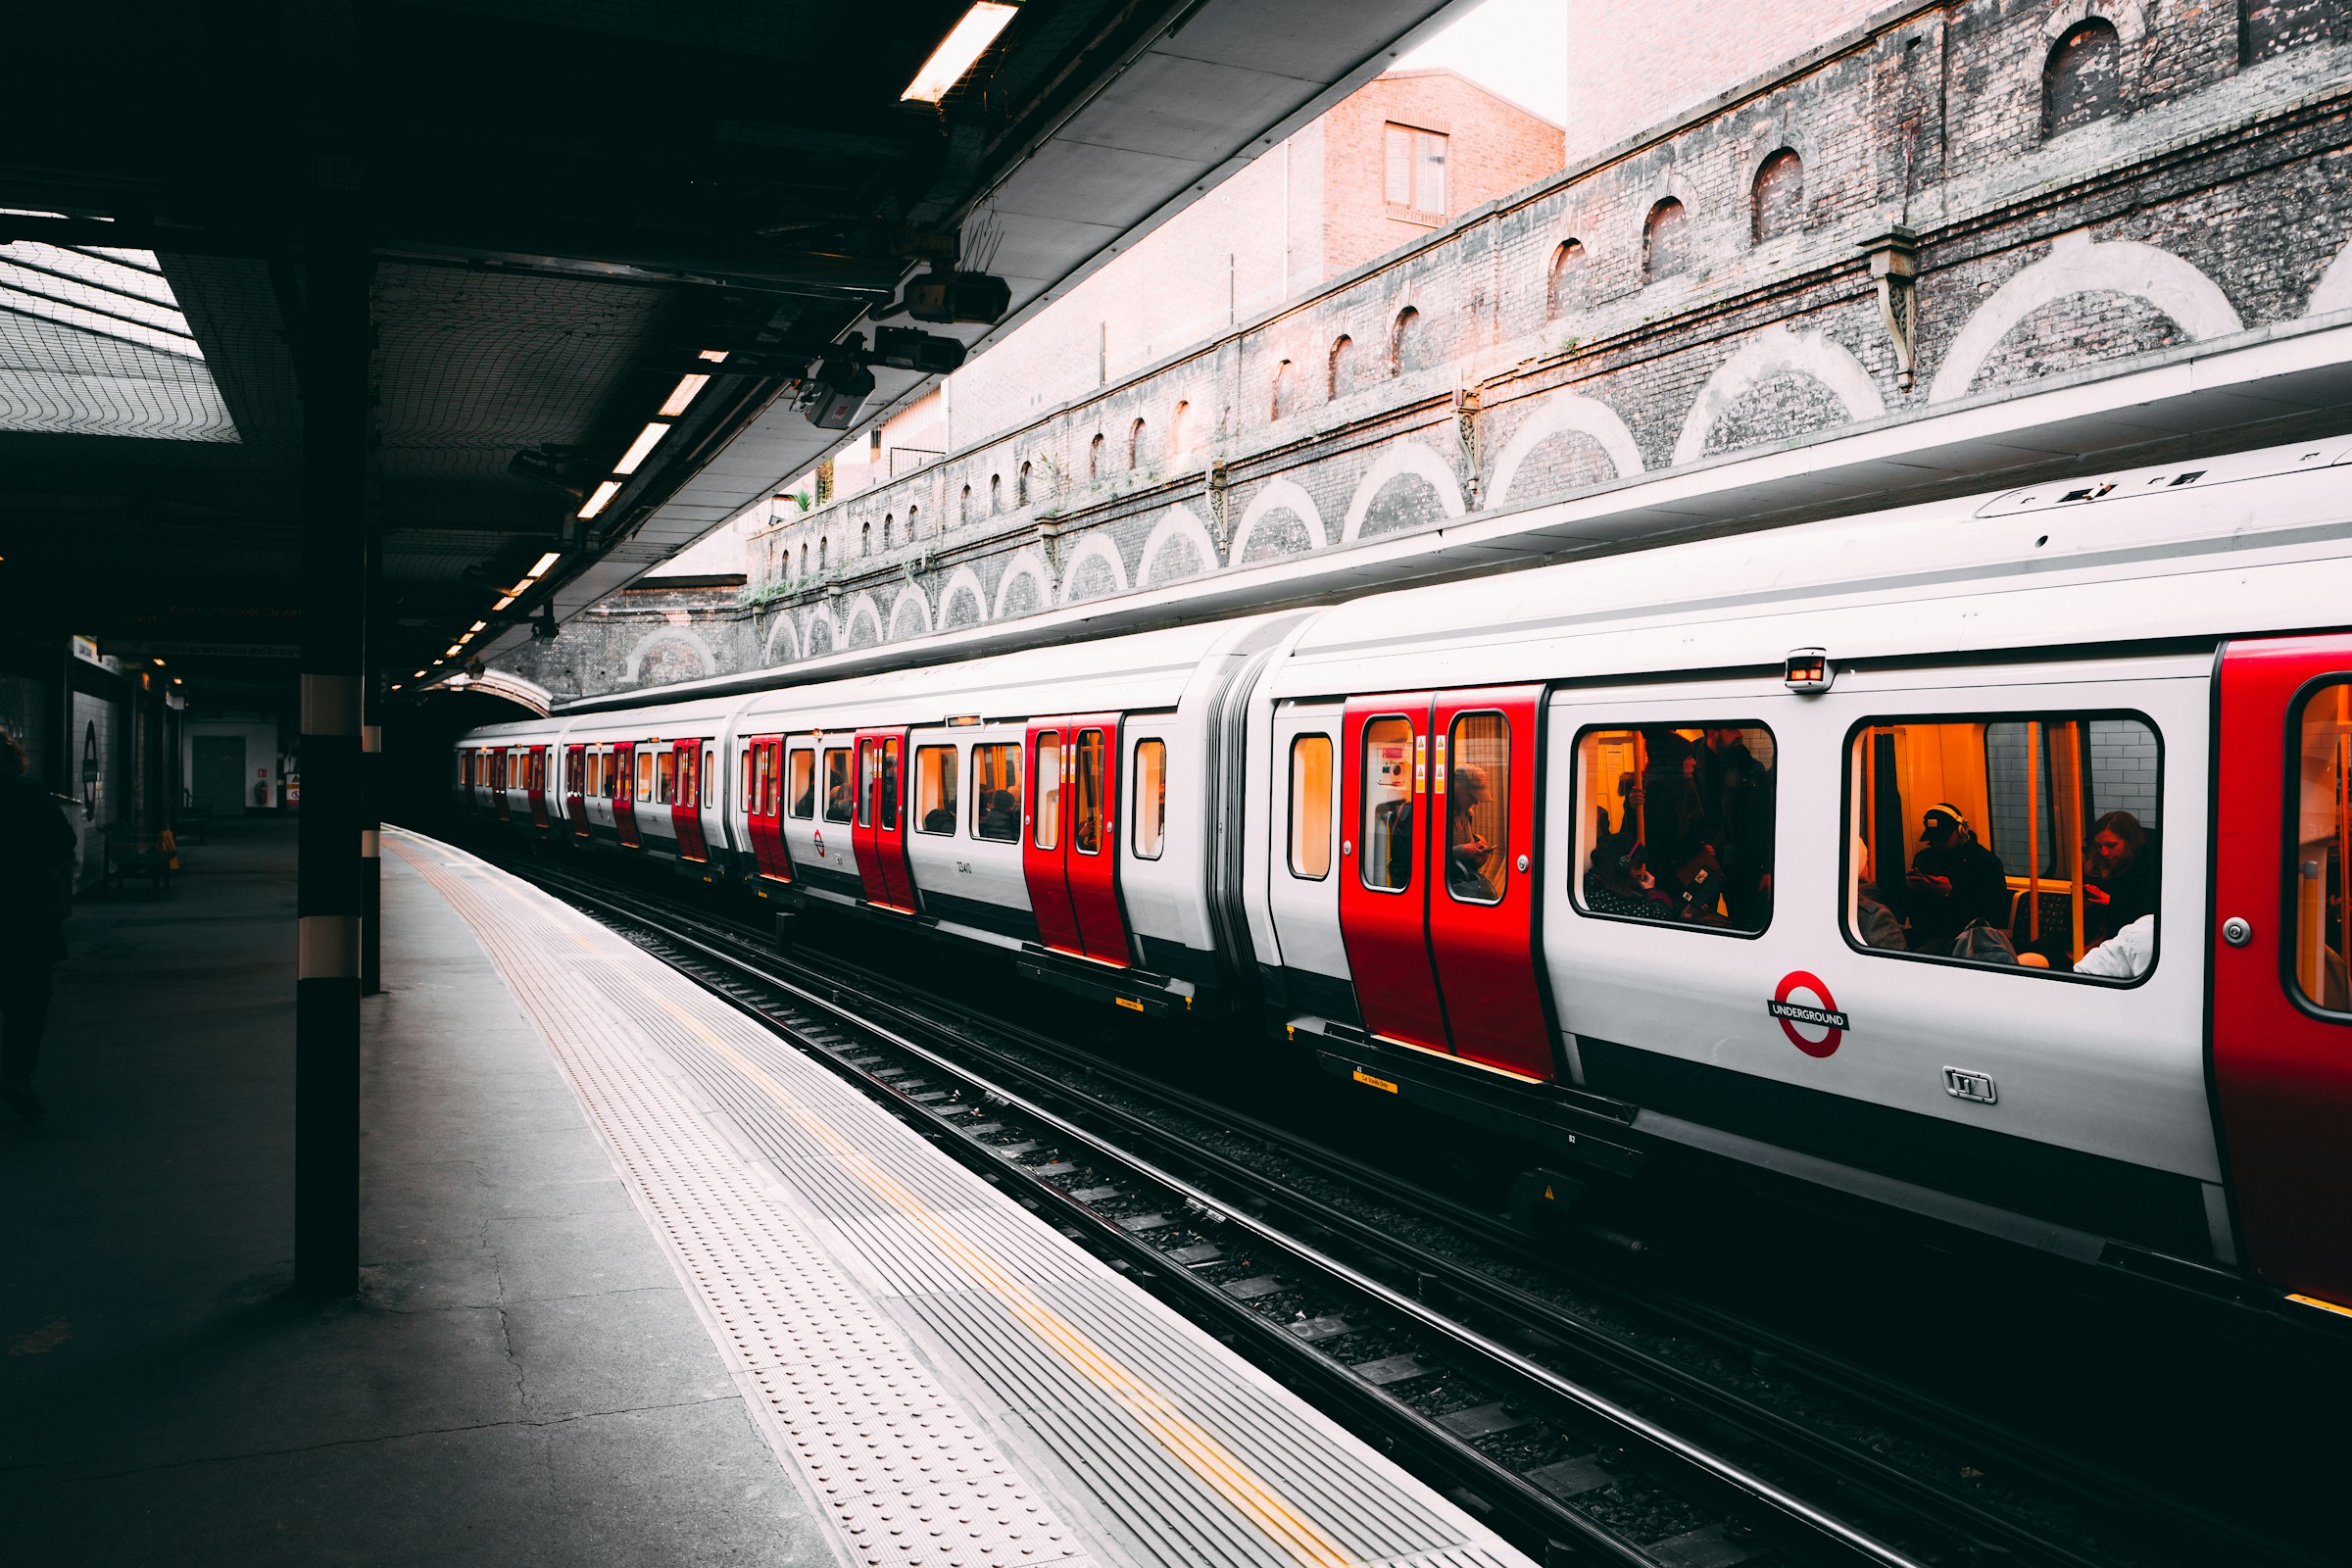 A white and red train moving on a railway track | Source: Unsplash